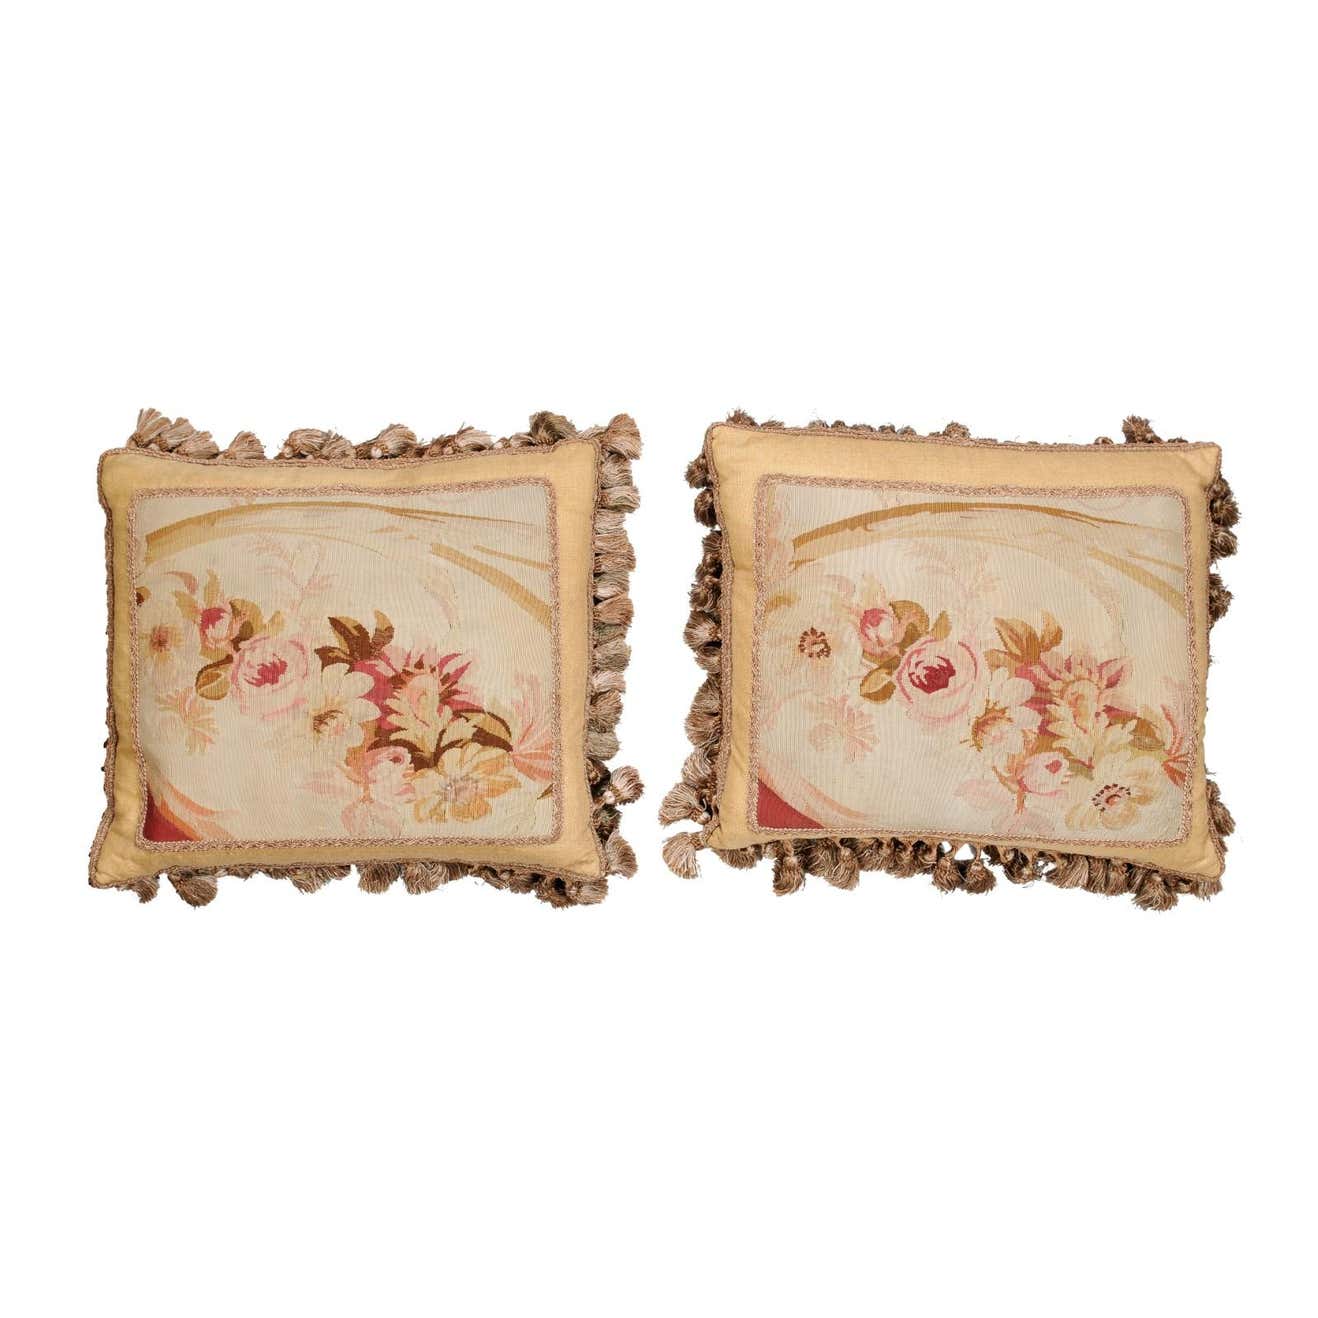 Pair of French 19th Century Aubusson Tapestry Pillows with Roses and Tassels